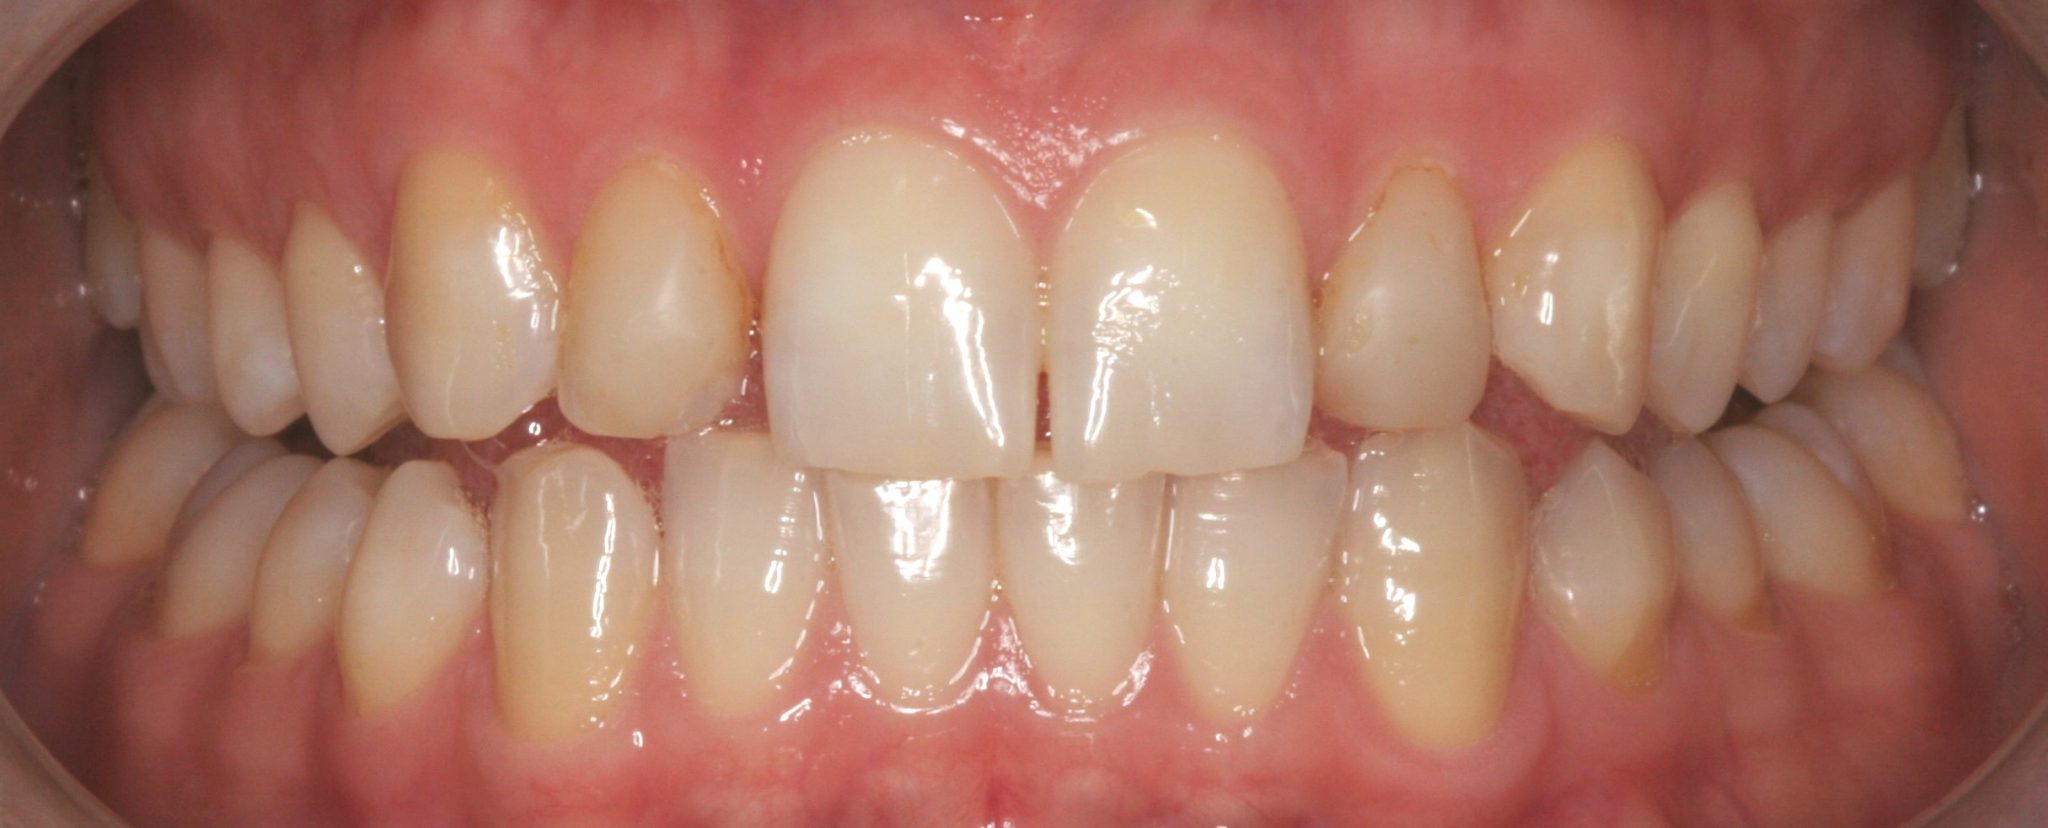 Lateral incisors before veneers were placed